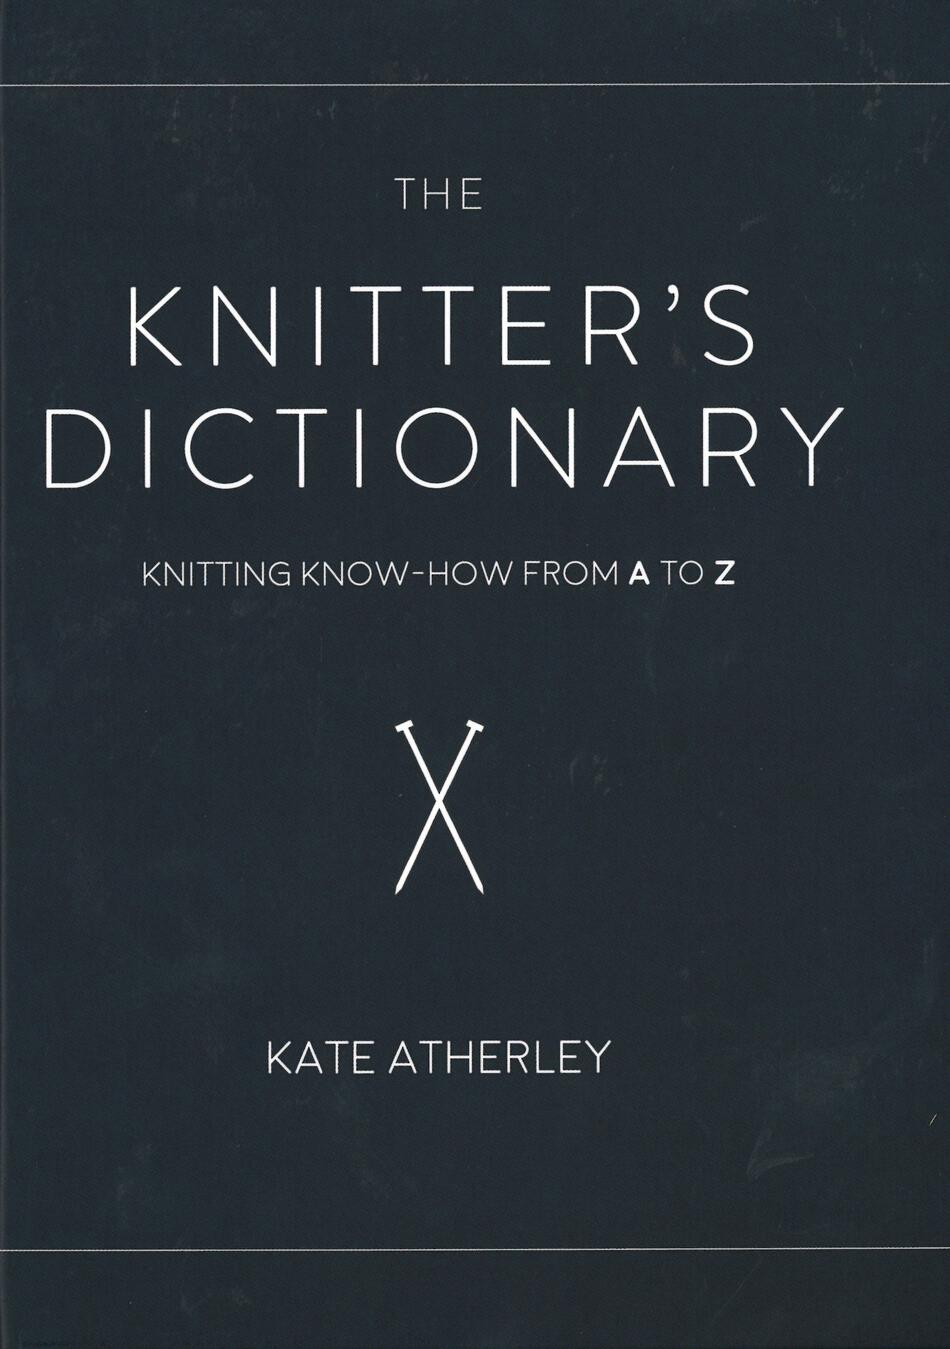 Knitting Books The Knitteraposs Dictionary  Knitting KnowHow from A to Z